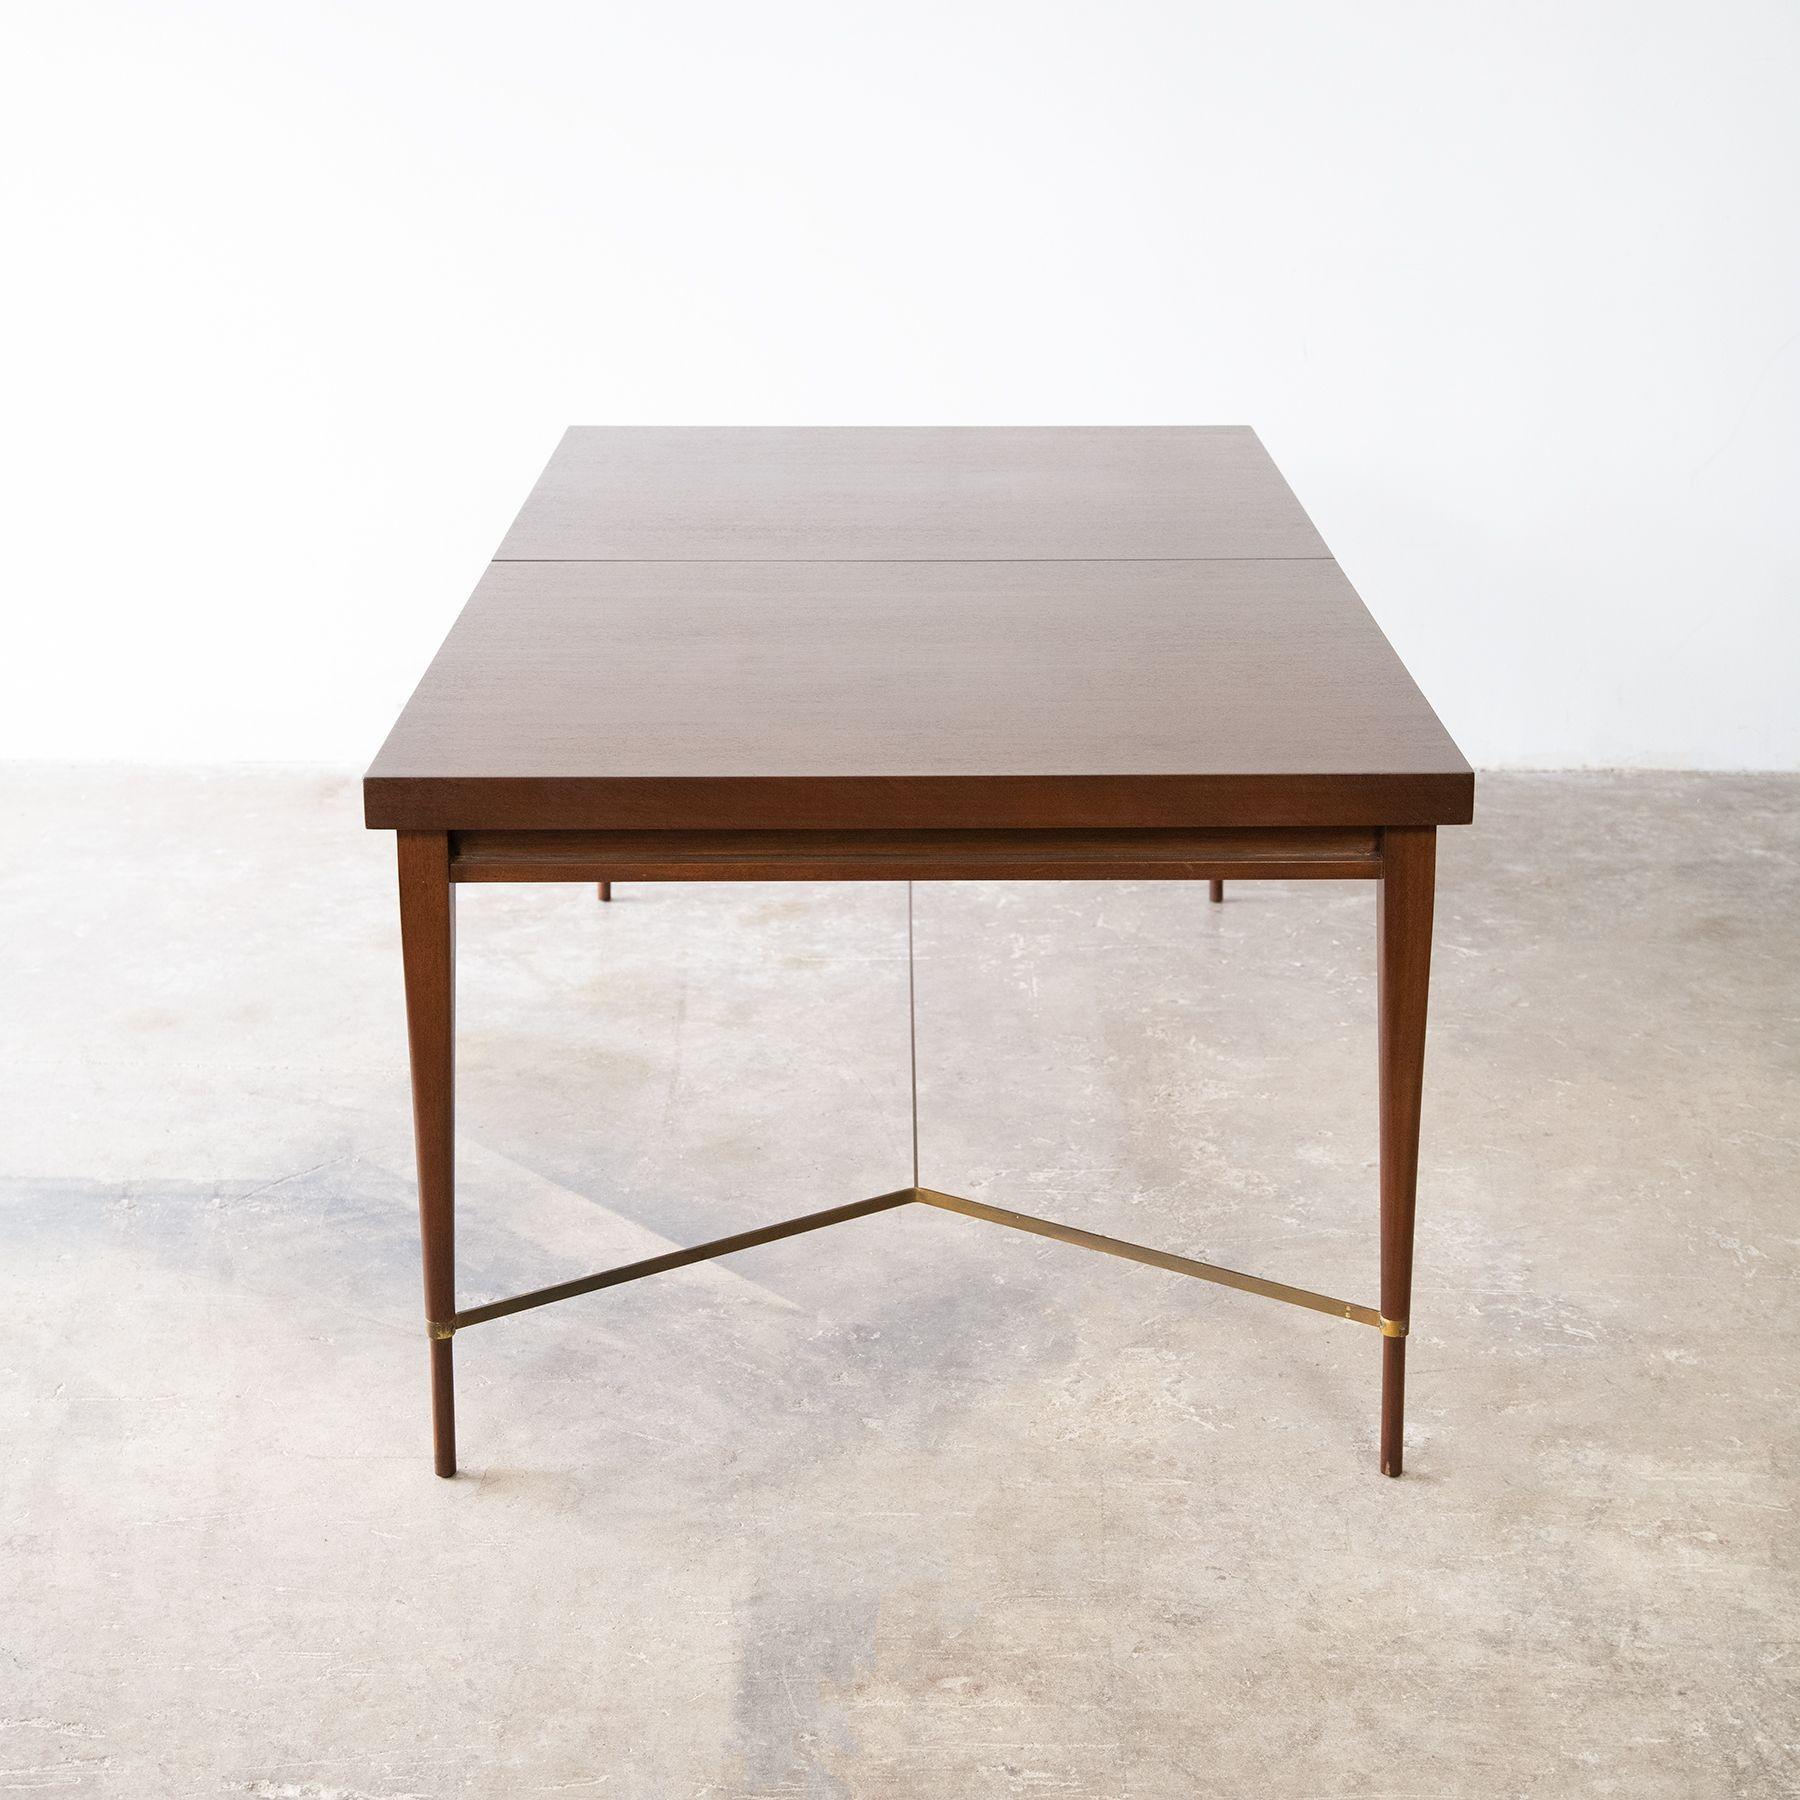 20th Century Paul McCobb Irwin Collection Mahogany Dining Table for Calvin, 1950s